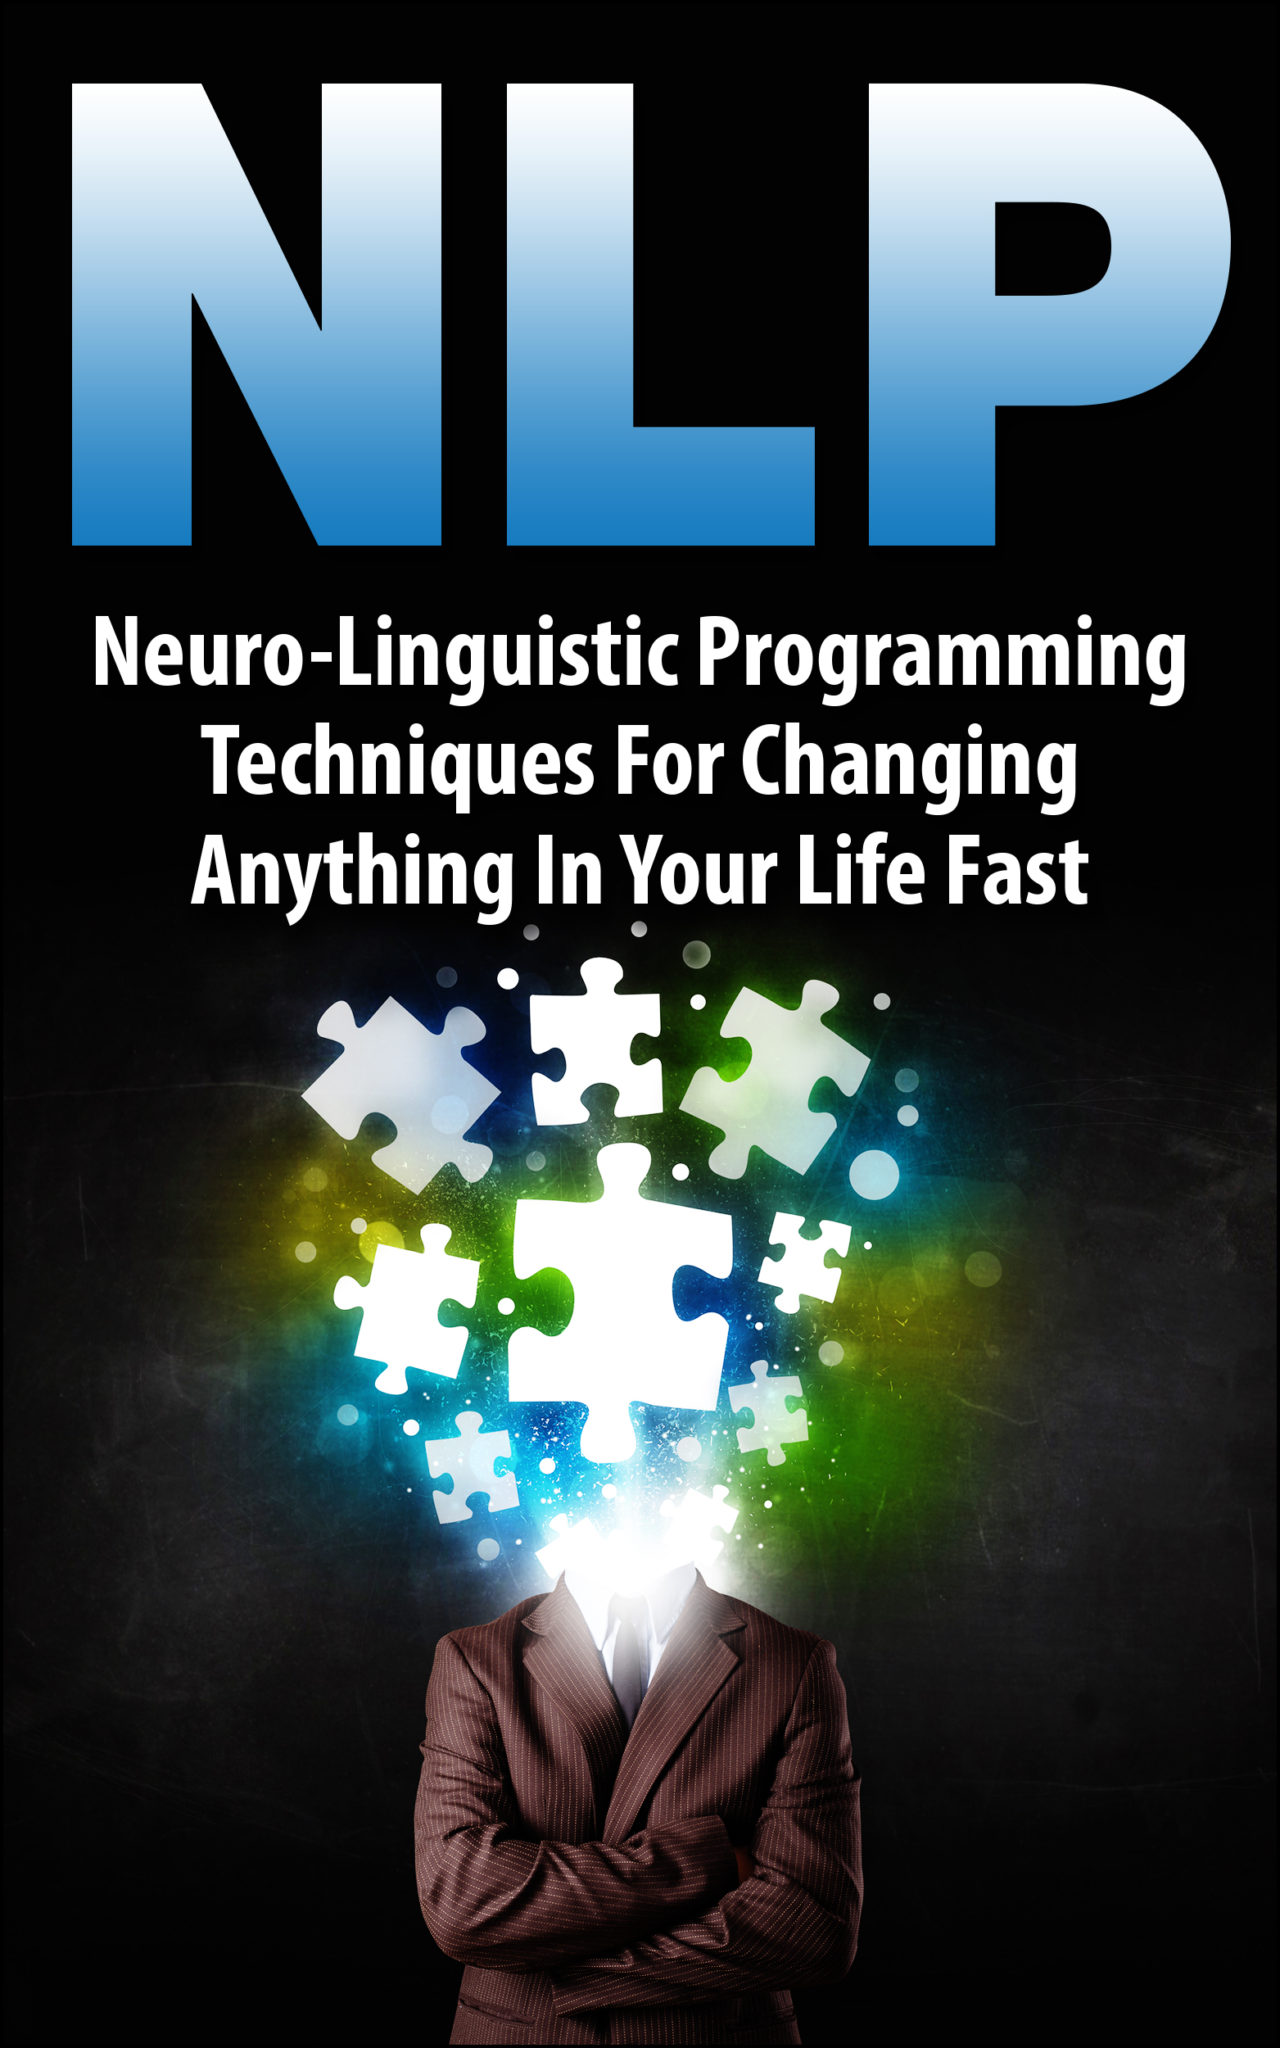 FREE: NLP: Neuro-Linguistic Programming Techniques For Changing Anything In Your Life Fast by Michael Wright